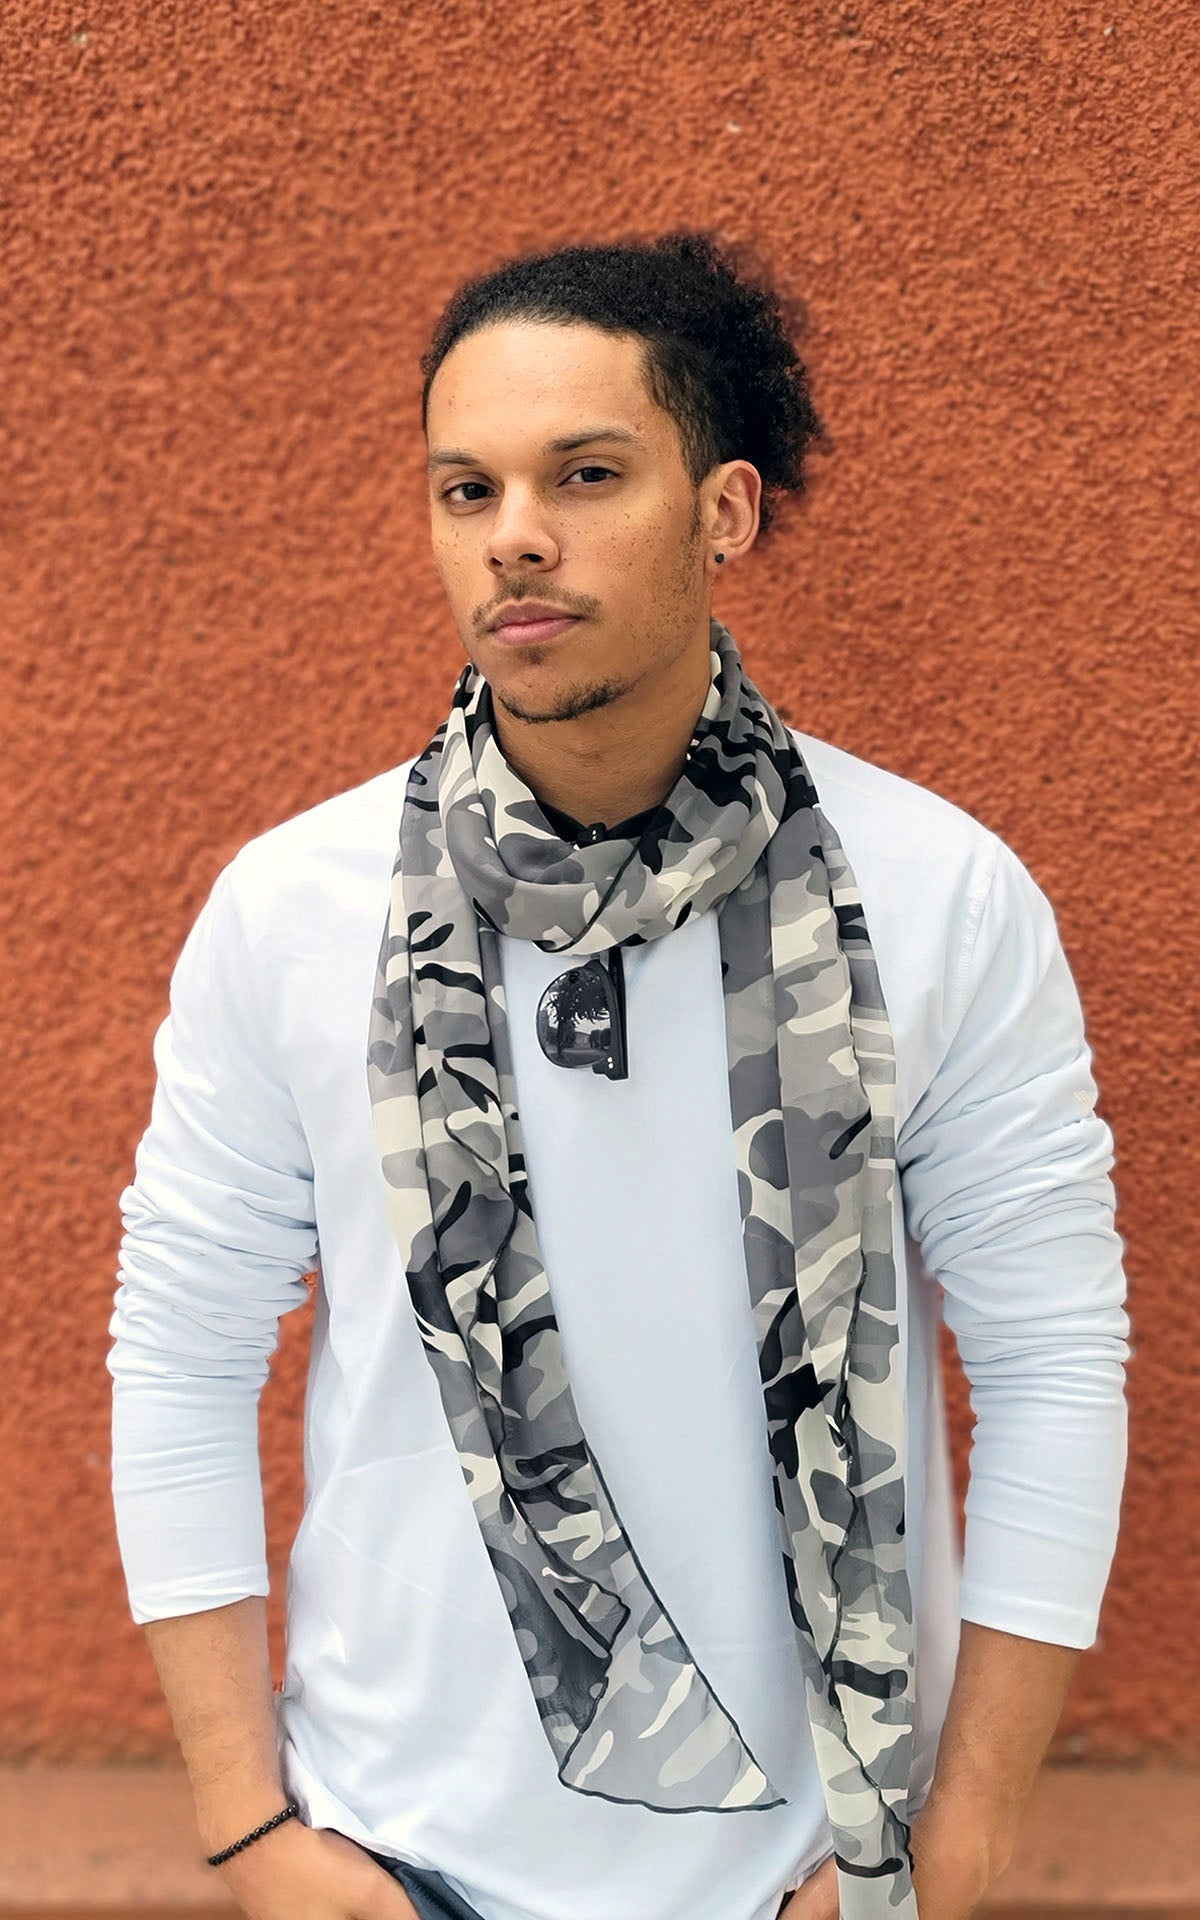 Man modeling Handkerchief Scarf in Black Ops camoflauge chiffon scarf in black, gray , and ivory with sunglasses